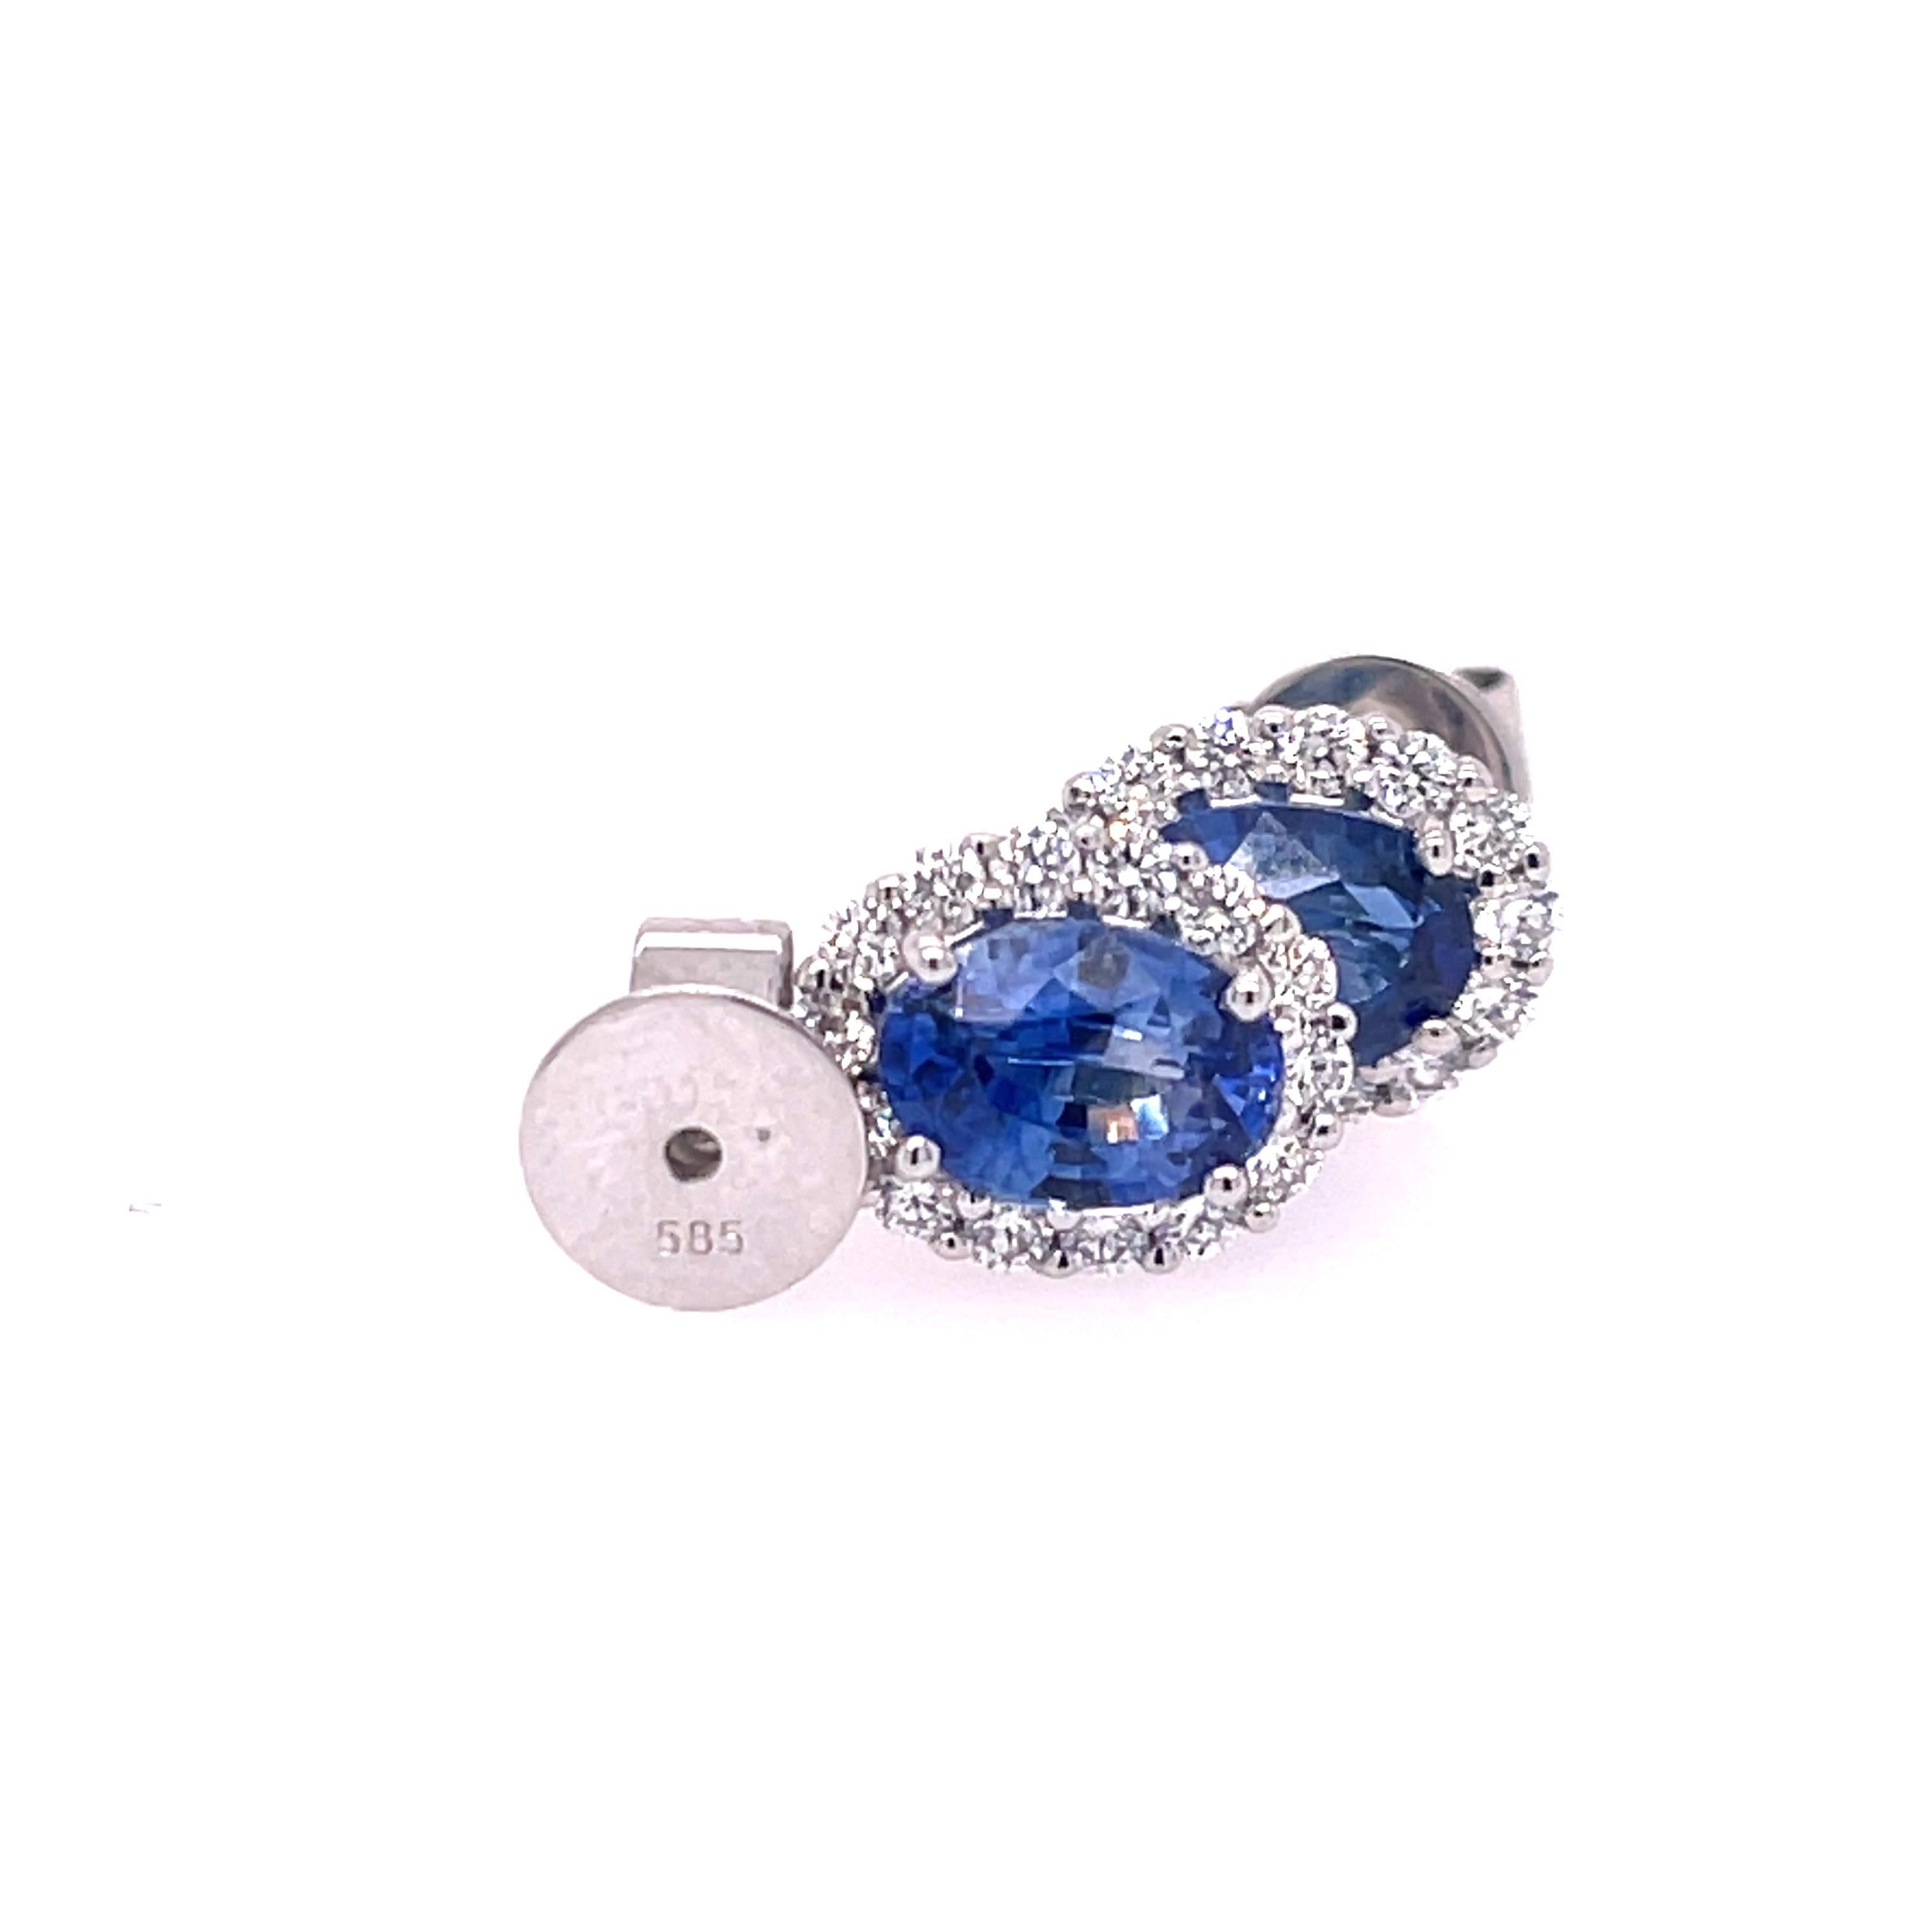 Sapphire and diamond studs in 14K white gold. The earrings feature 2.09ctw oval sapphires with .43ctw halo of round diamonds.  